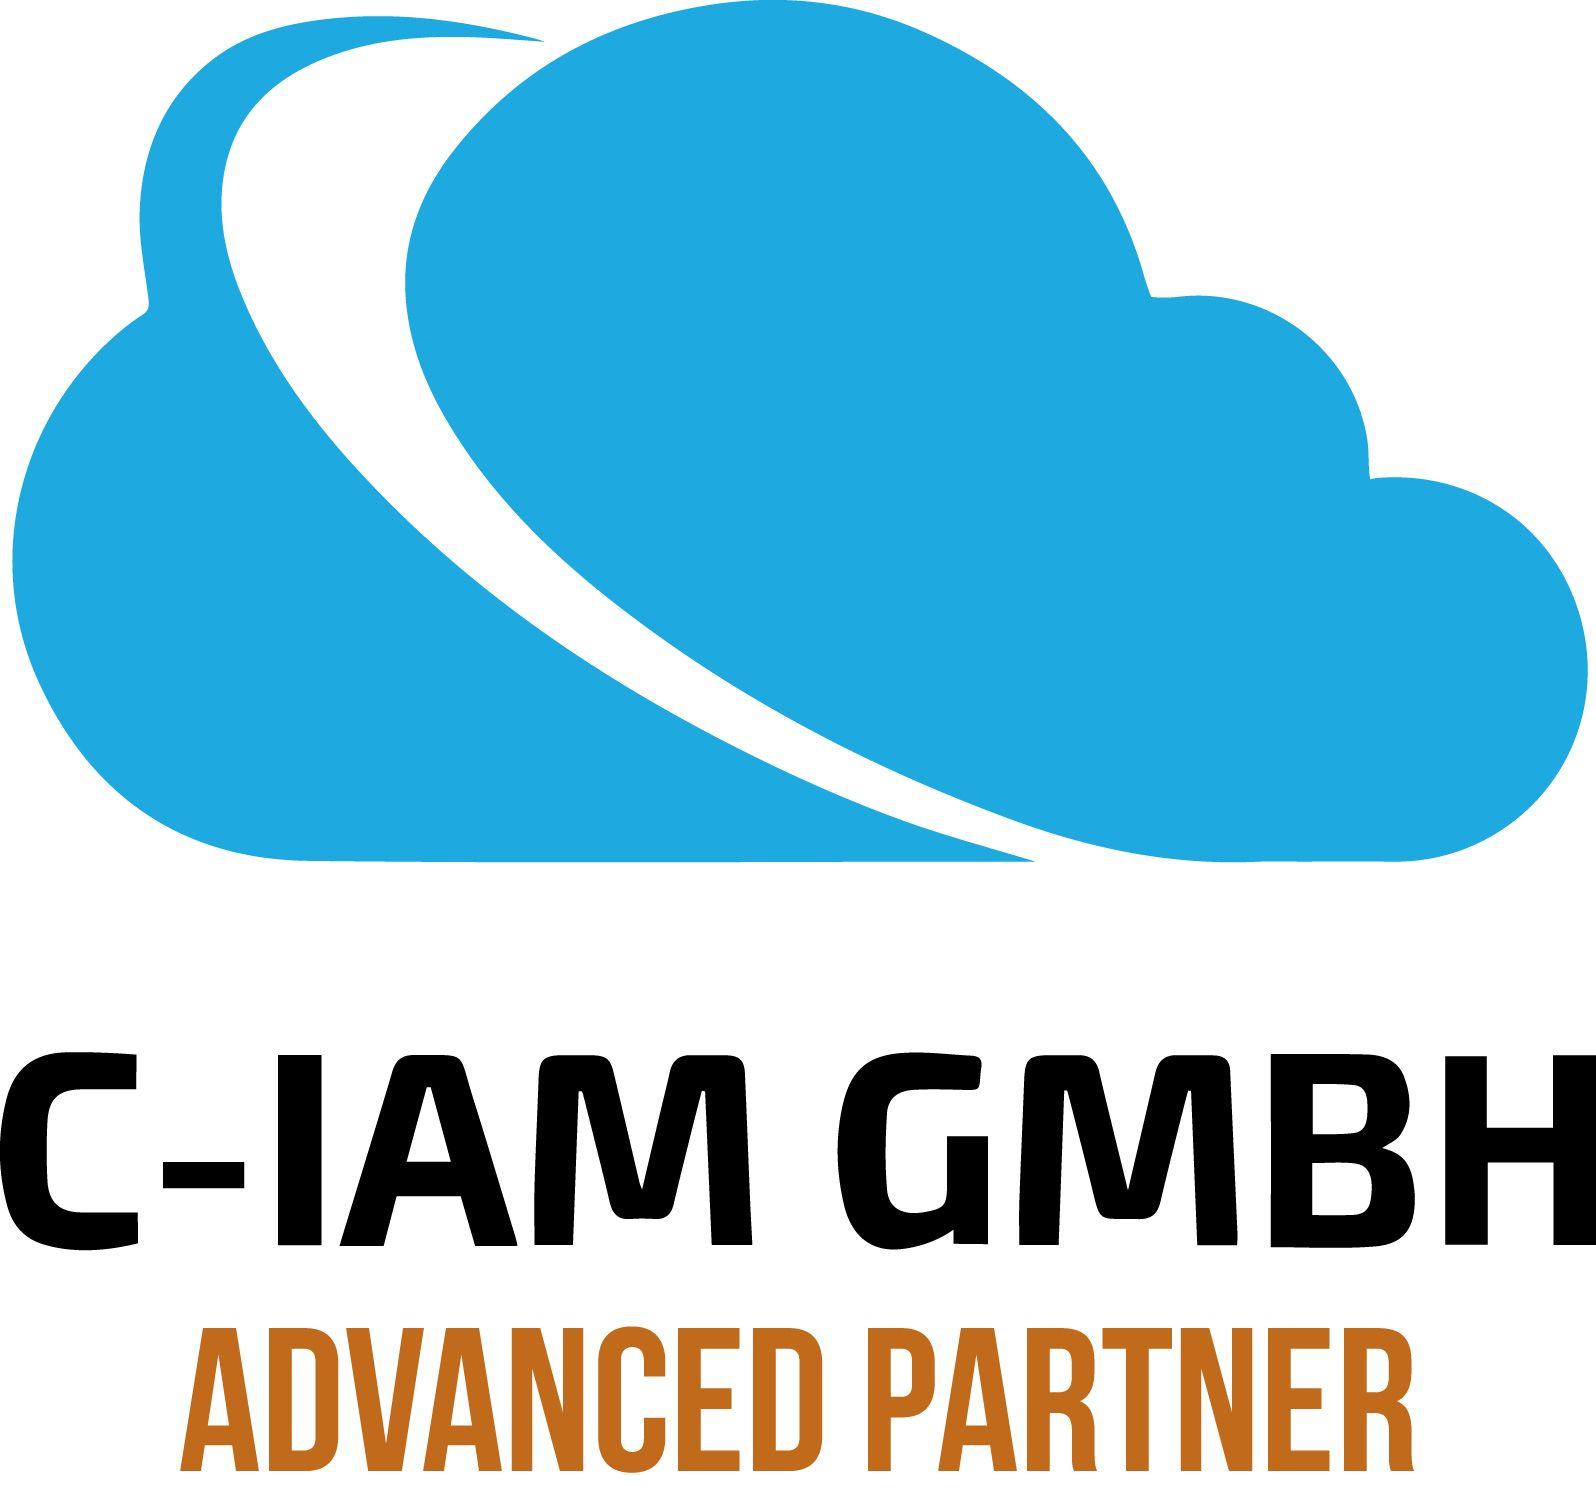 Iam Logo - C IAM GmbH. Cloud Identity And Access Management As A Service